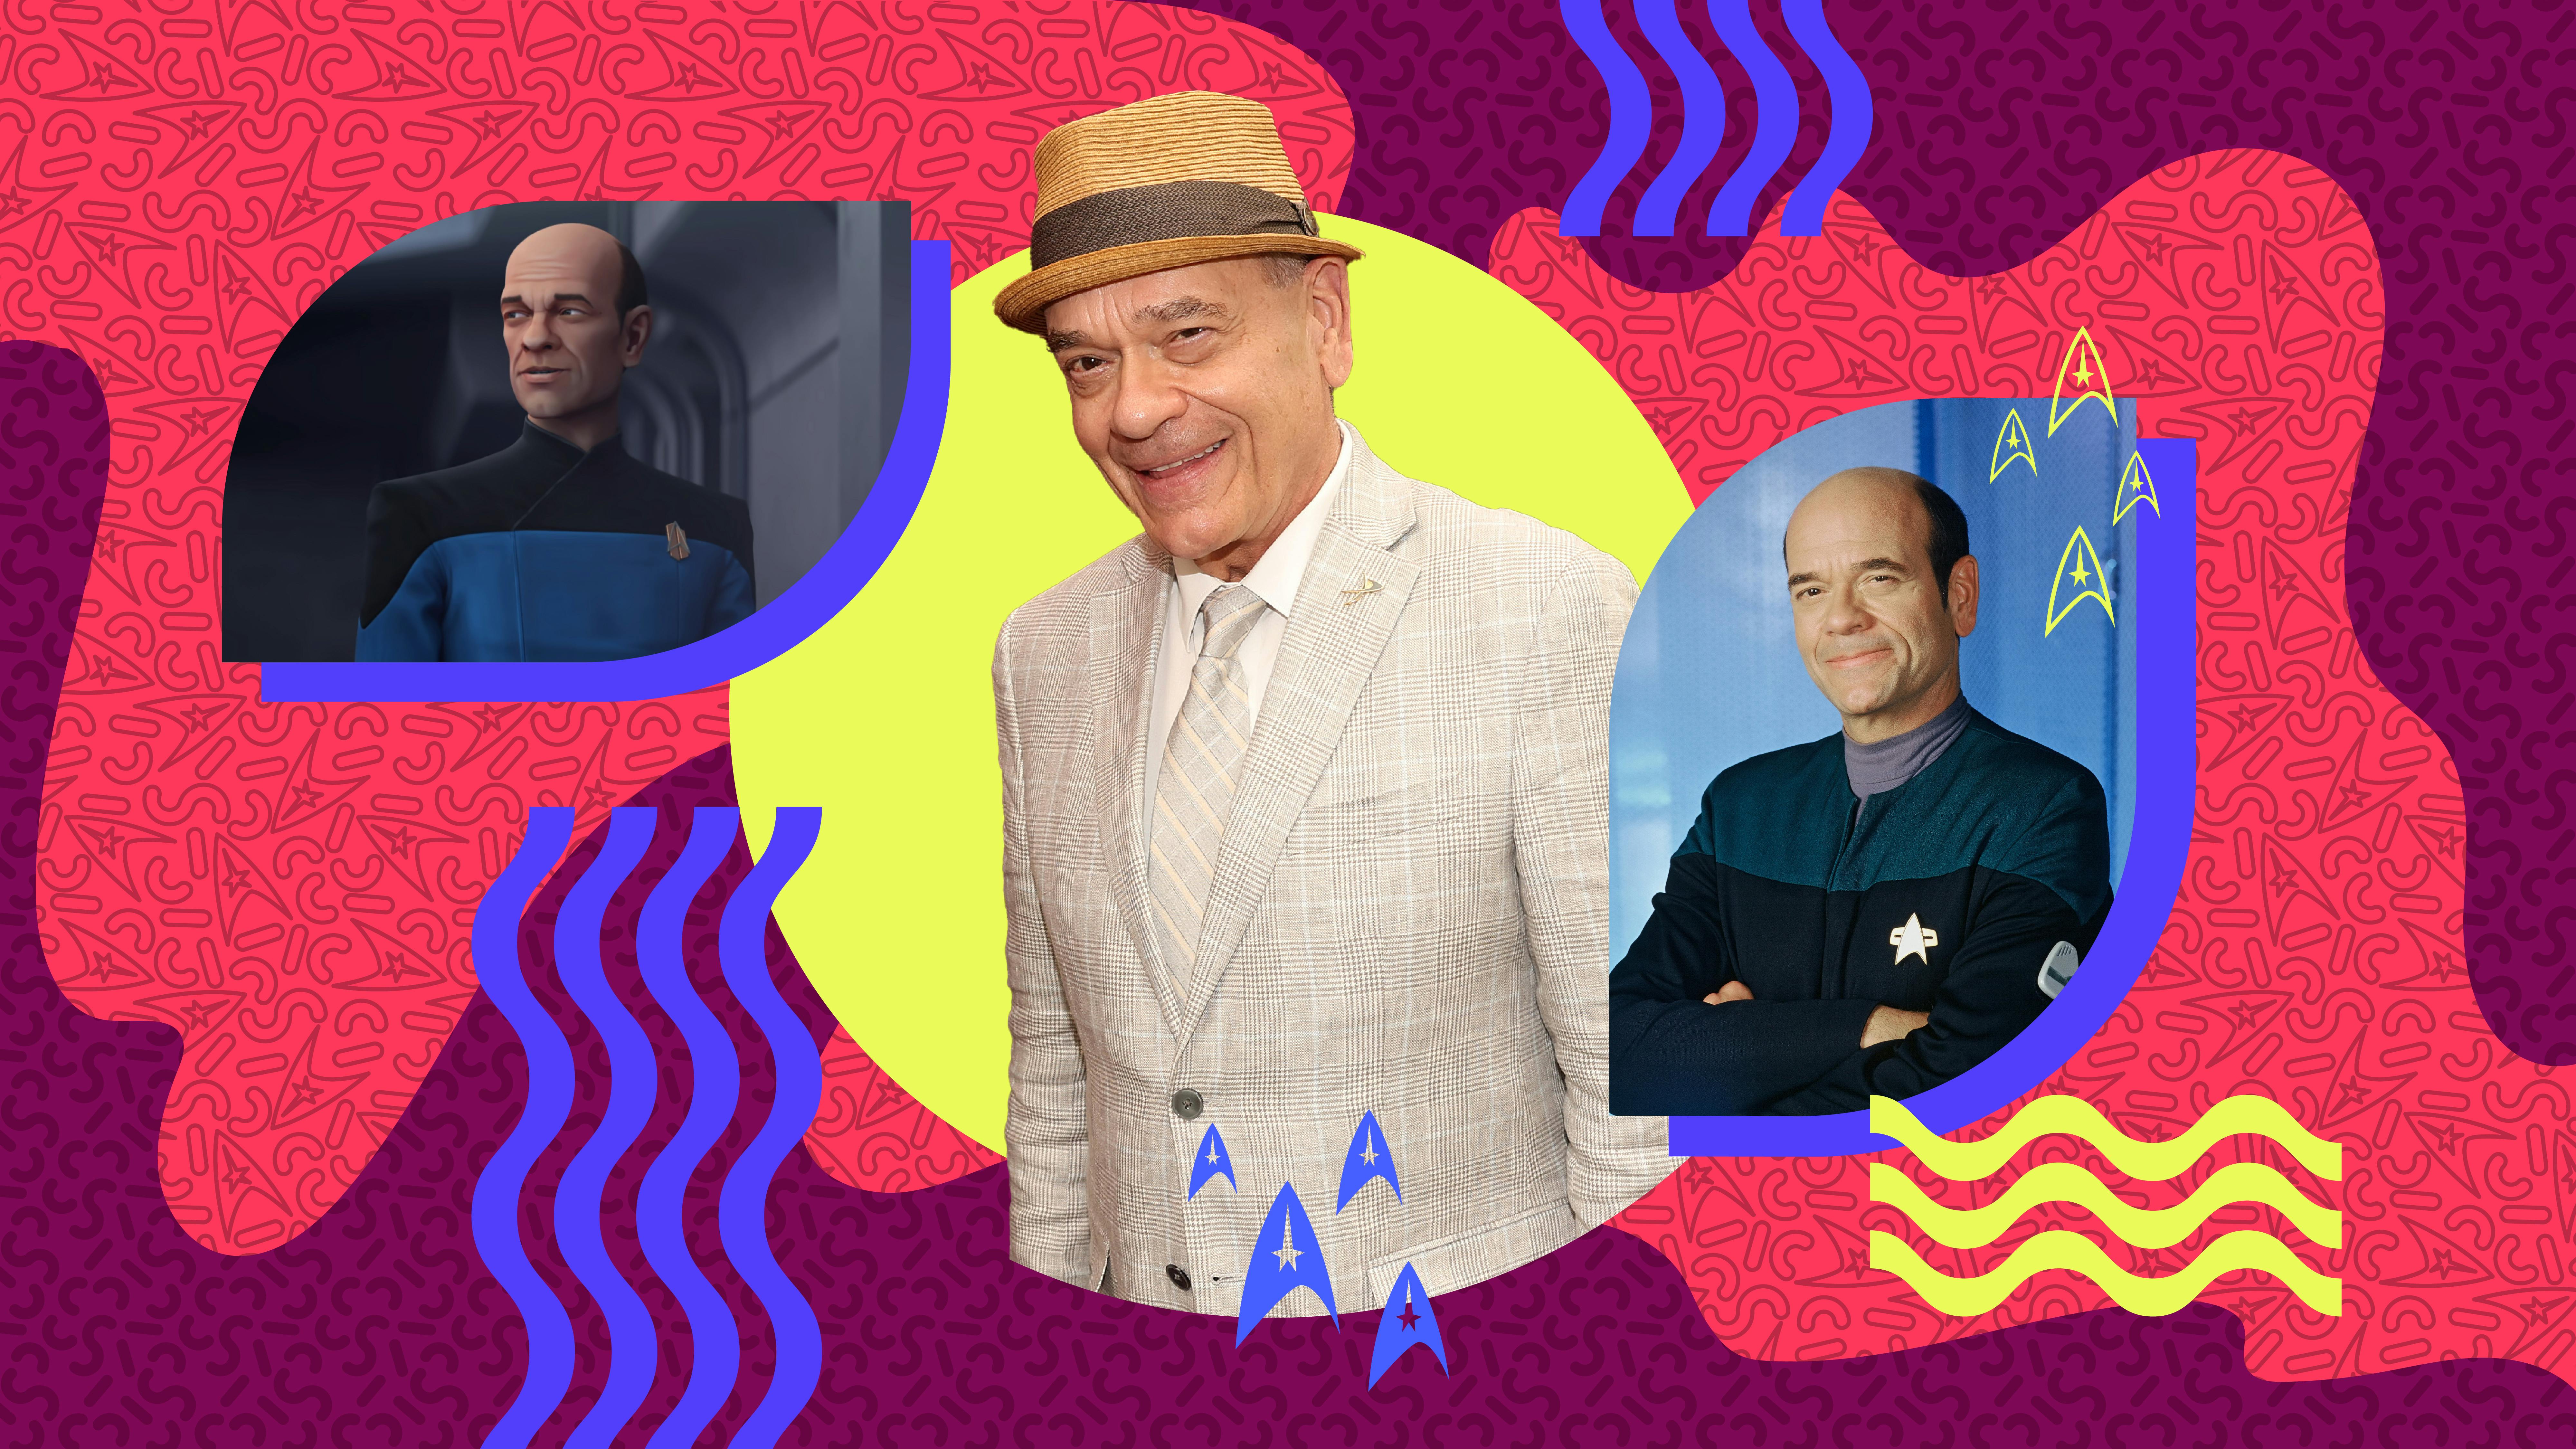 Graphic illustrated collage featuring Robert Picardo and promo images of The Doctor from Star Trek: Voyager and Star Trek: Prodigy